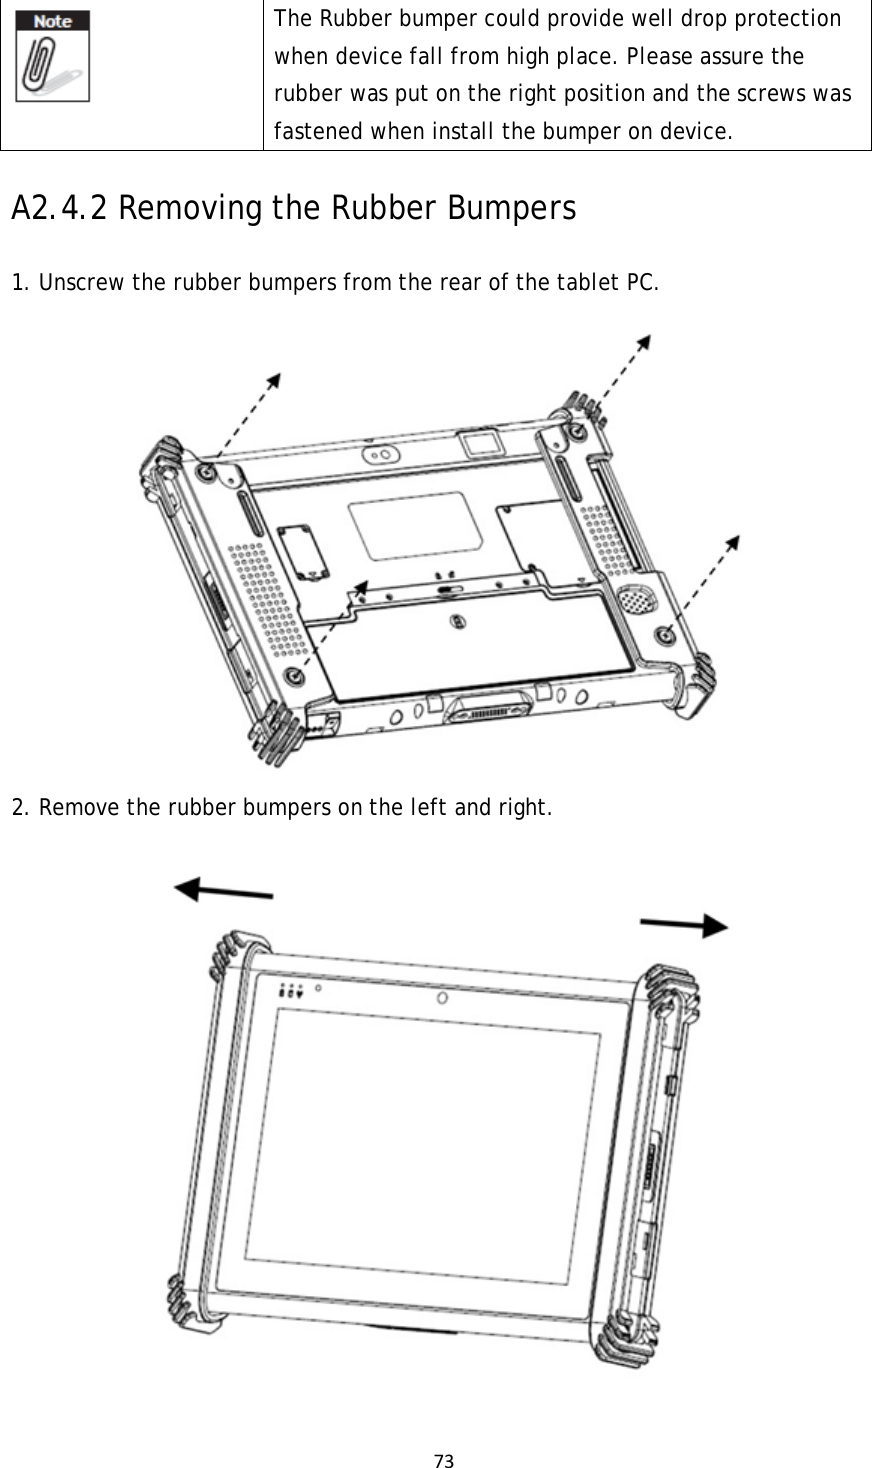 73 The Rubber bumper could provide well drop protection when device fall from high place. Please assure the rubber was put on the right position and the screws was fastened when install the bumper on device.   A2.4.2 Removing the Rubber Bumpers  1. Unscrew the rubber bumpers from the rear of the tablet PC.  2. Remove the rubber bumpers on the left and right.  